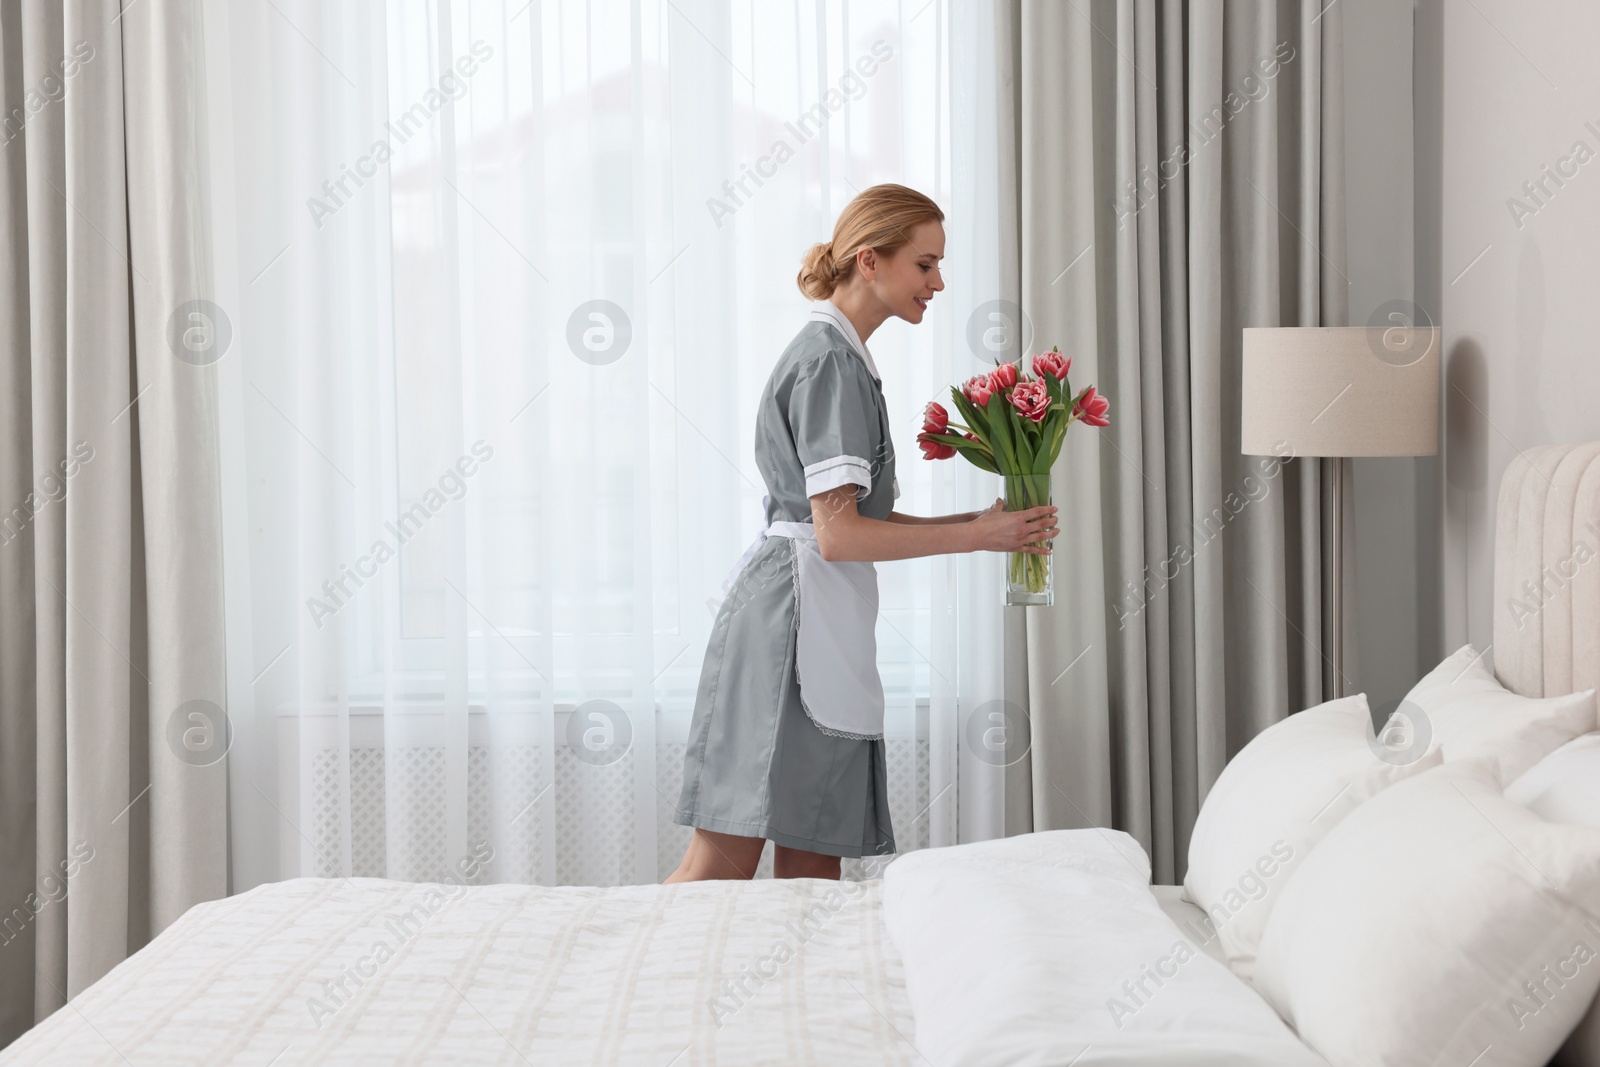 Photo of Chambermaid with fresh flowers in hotel bedroom